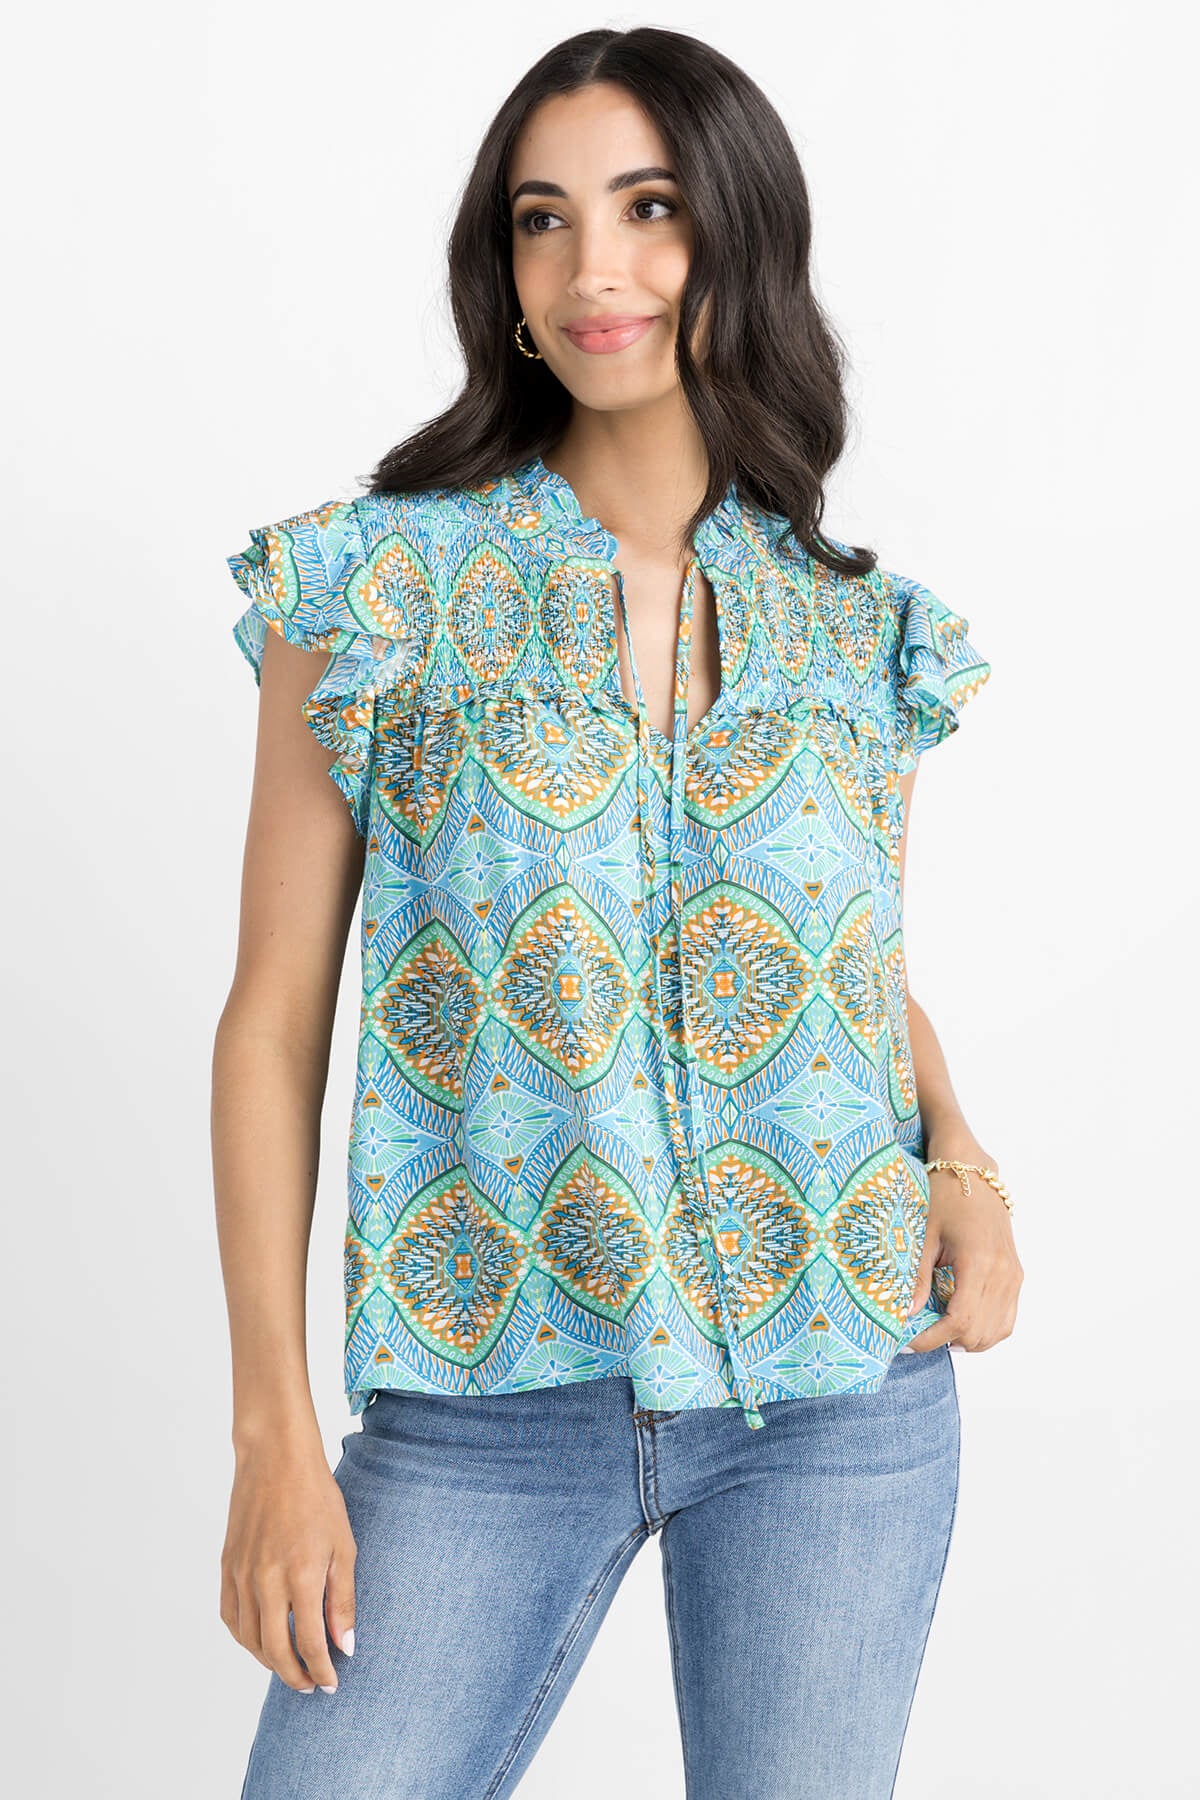 Current Air Printed Flutter Sleeve Top